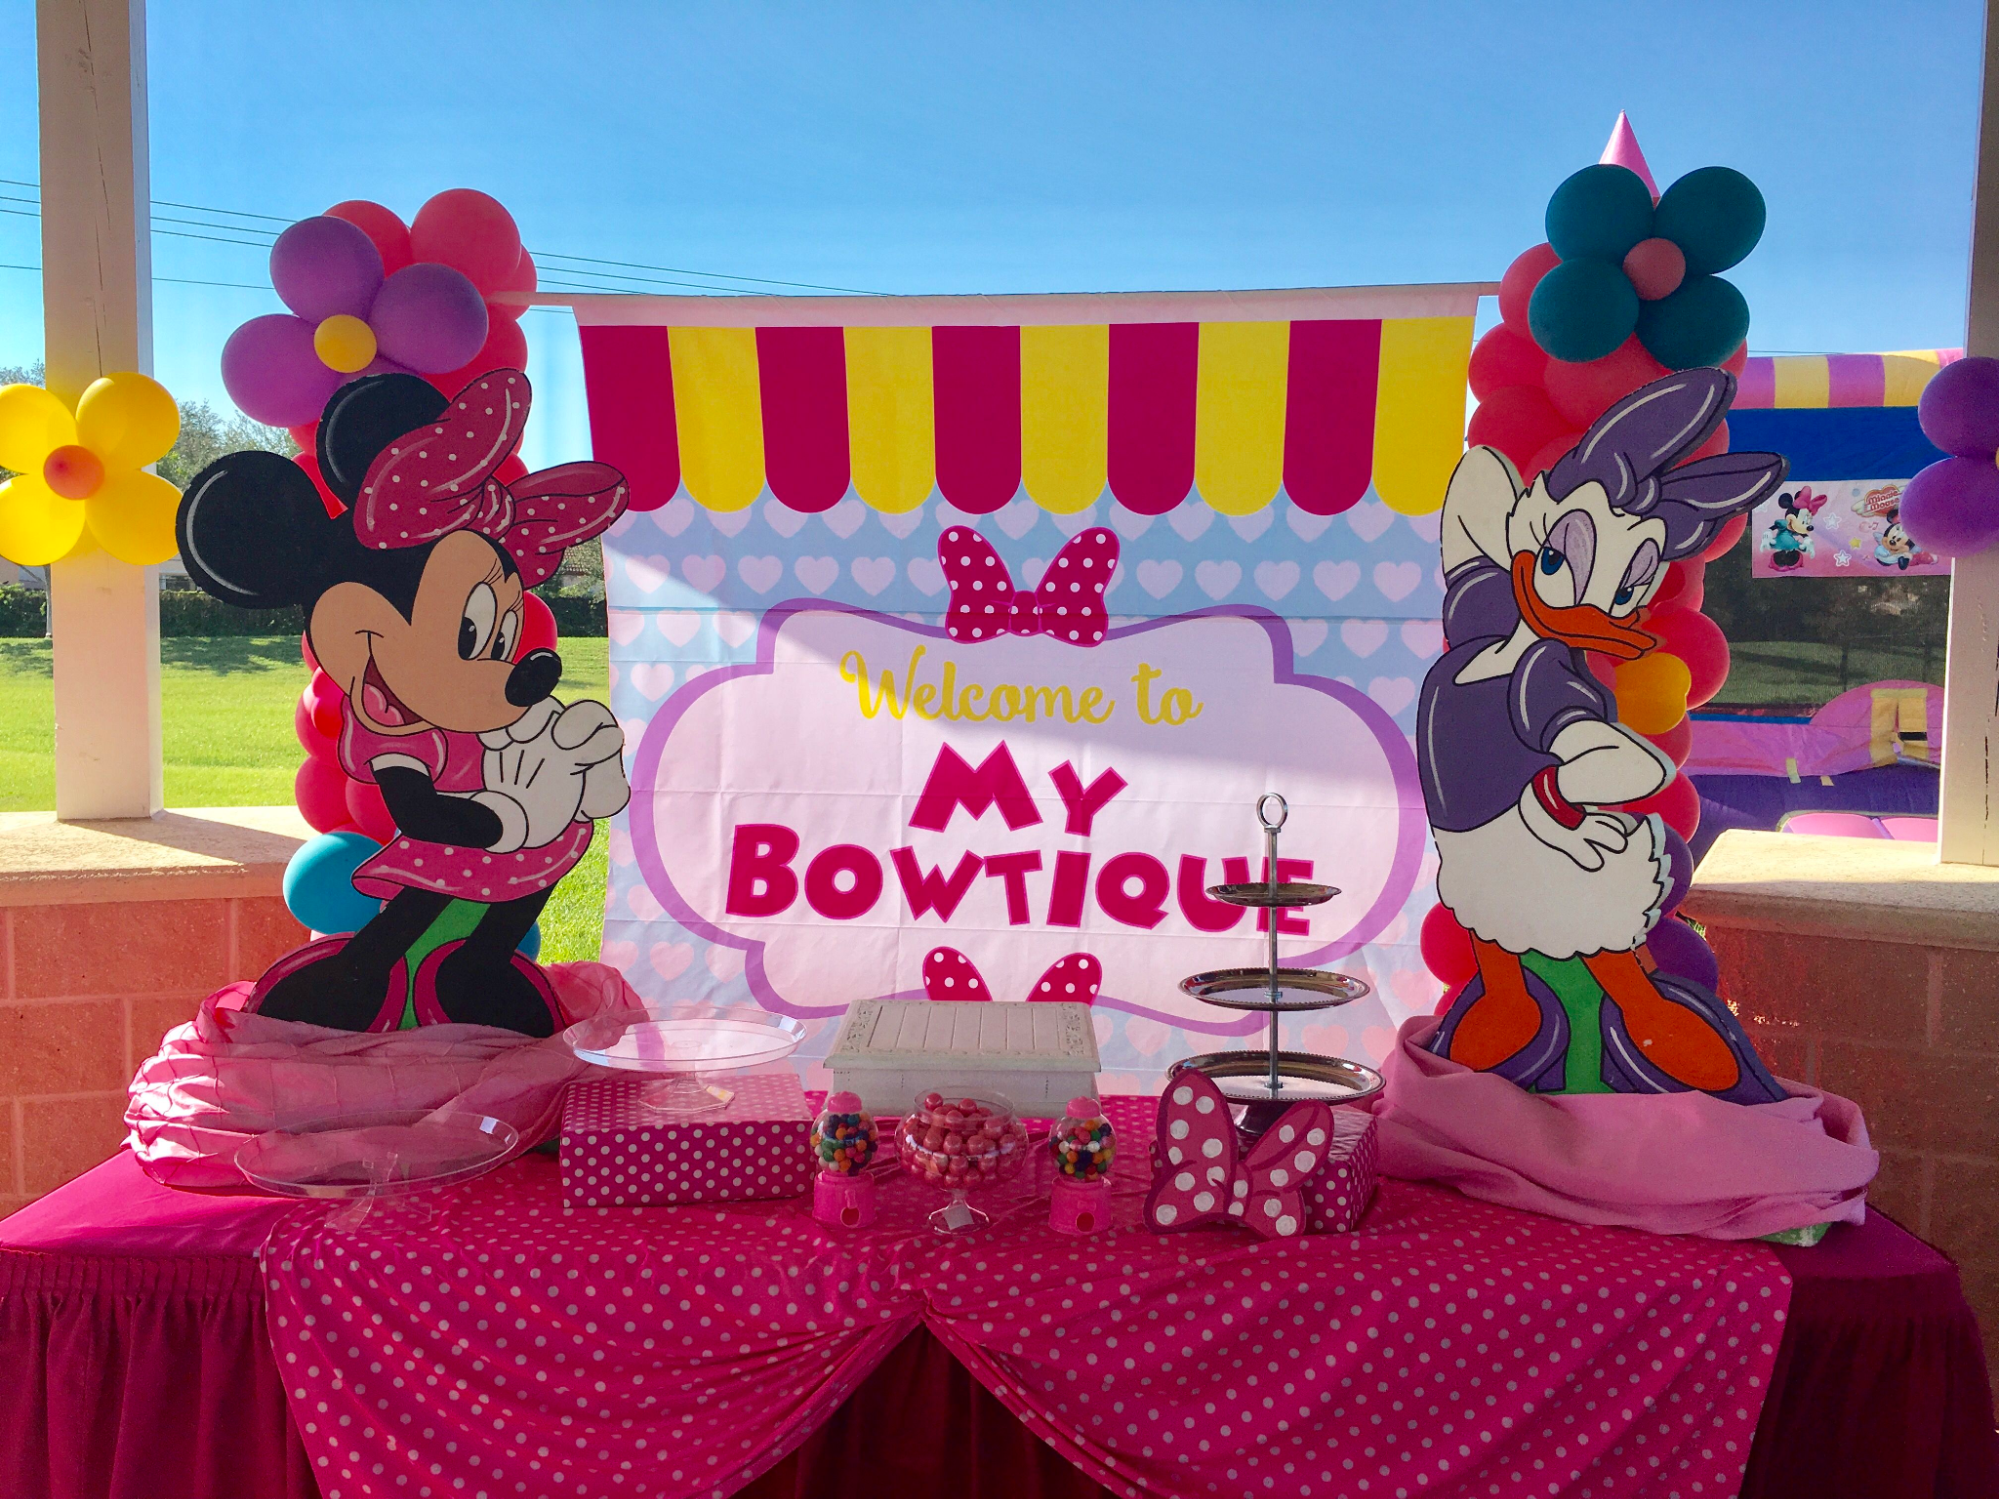 Minnie-mouse-themed birthday party bowtique